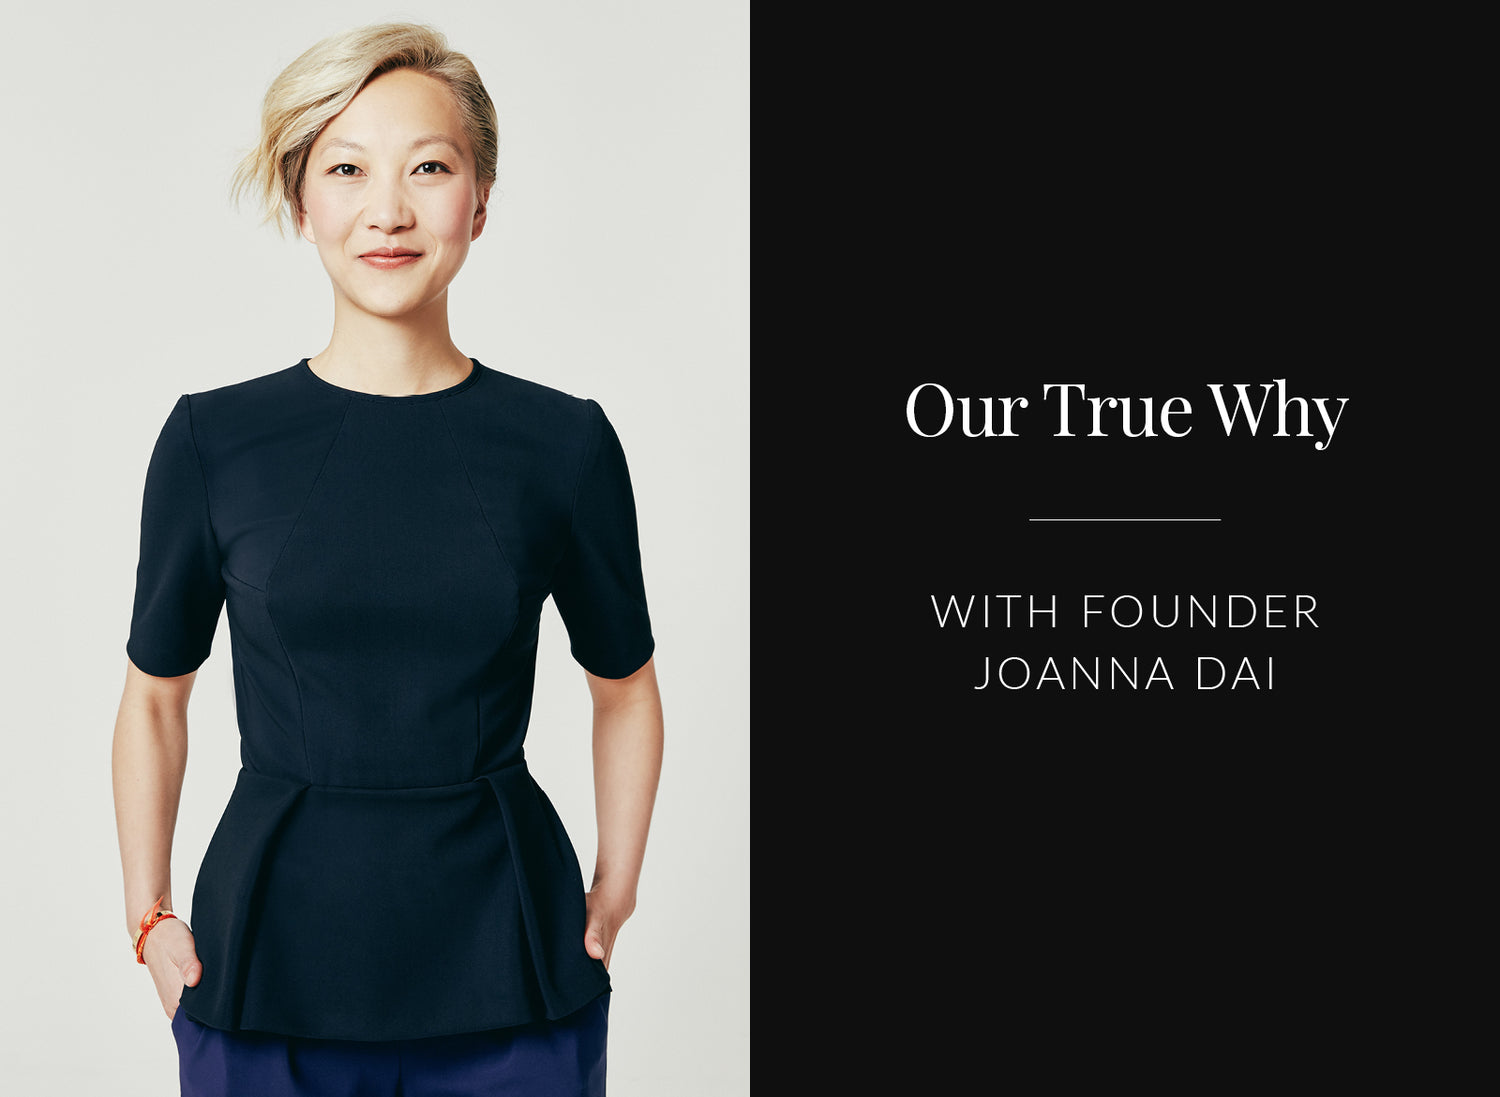 IWD 2020: Our True Why with Joanna Dai